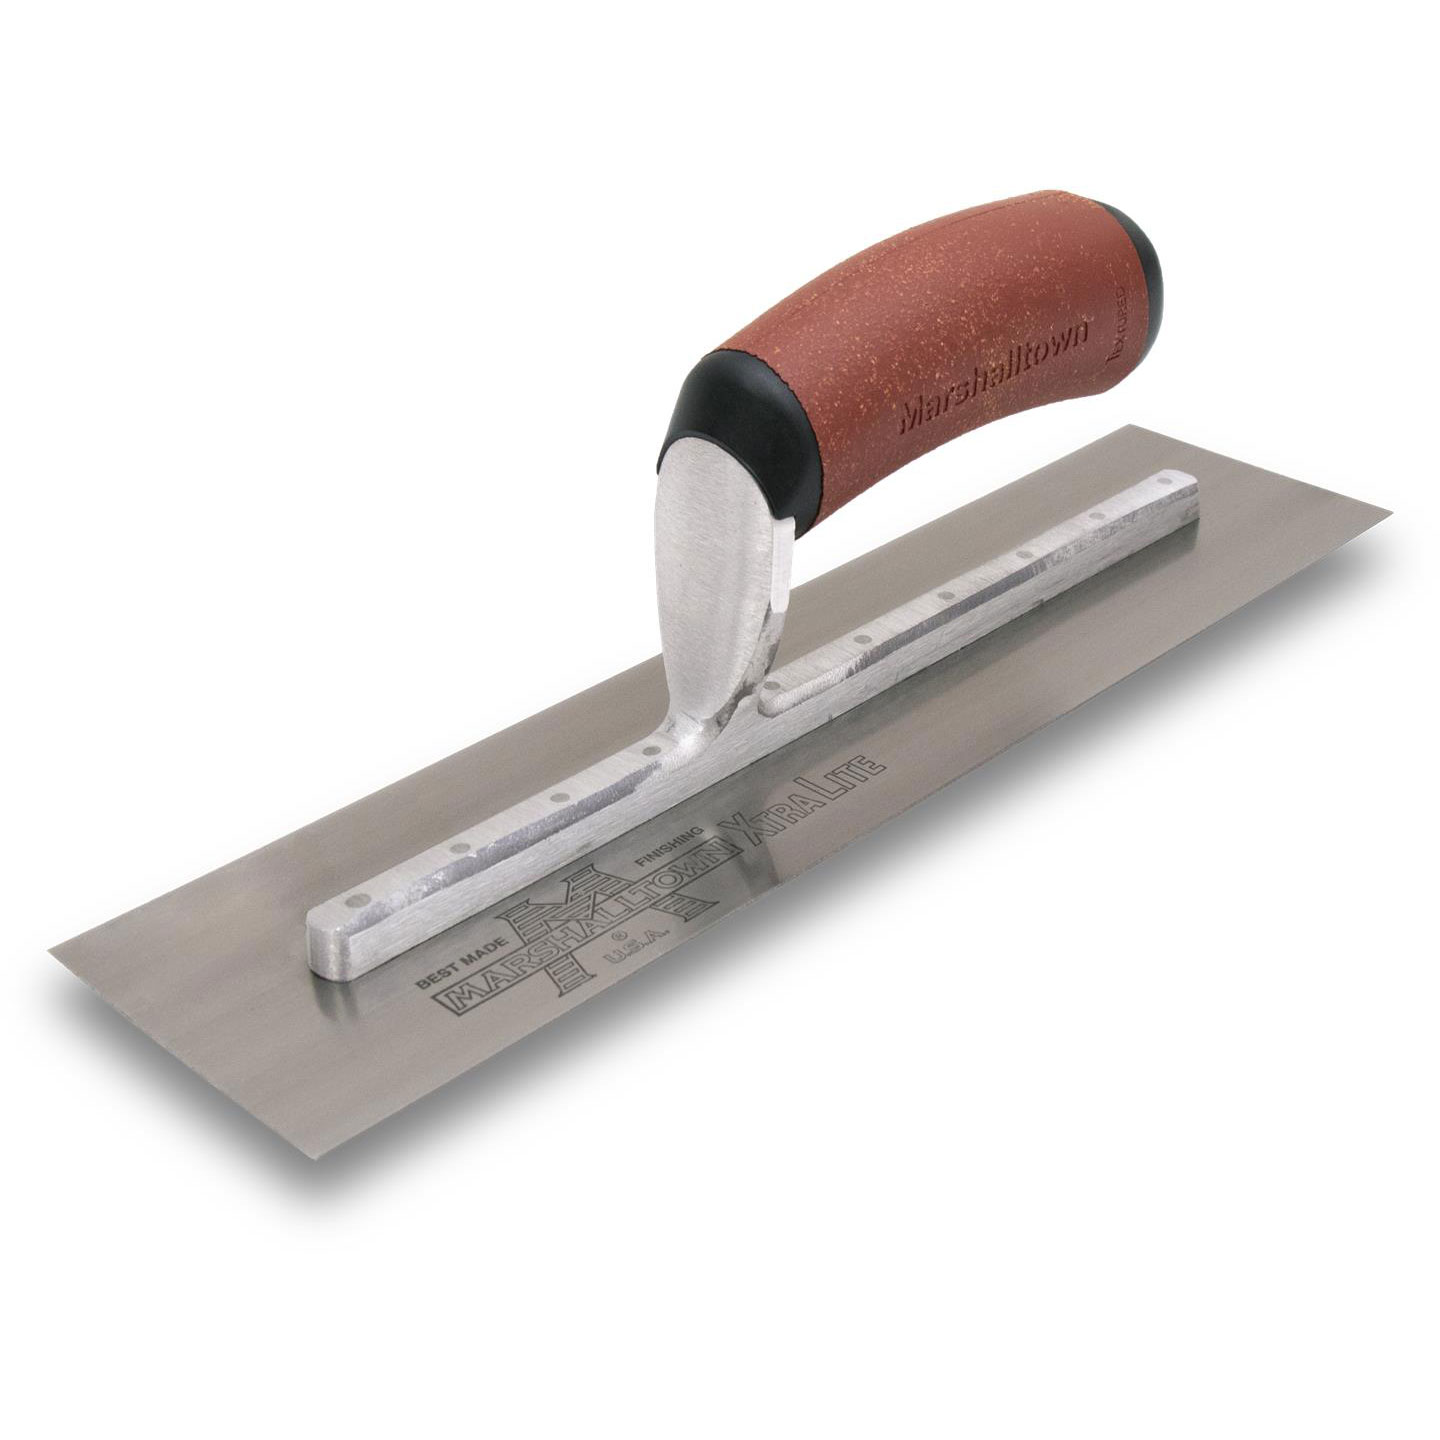 Marshalltown MXS67DC 16in x 4-1/2in Finishing Trowel with DuraCork Handle MXS67DC